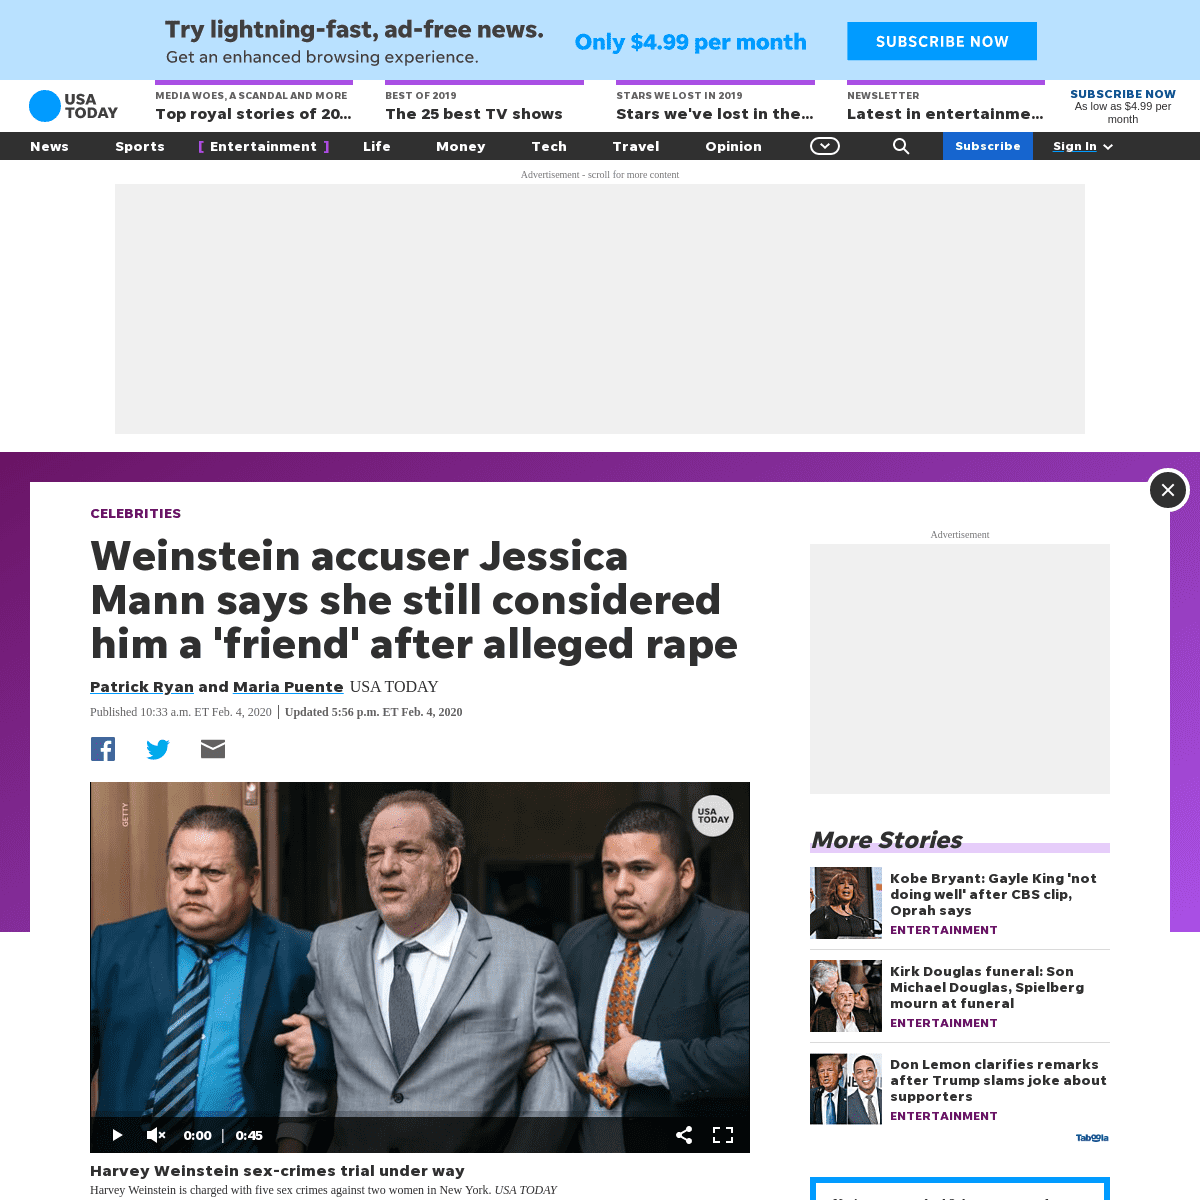 A complete backup of www.usatoday.com/story/entertainment/celebrities/2020/02/04/harvey-weinstein-trial-emanuela-postacchini-det